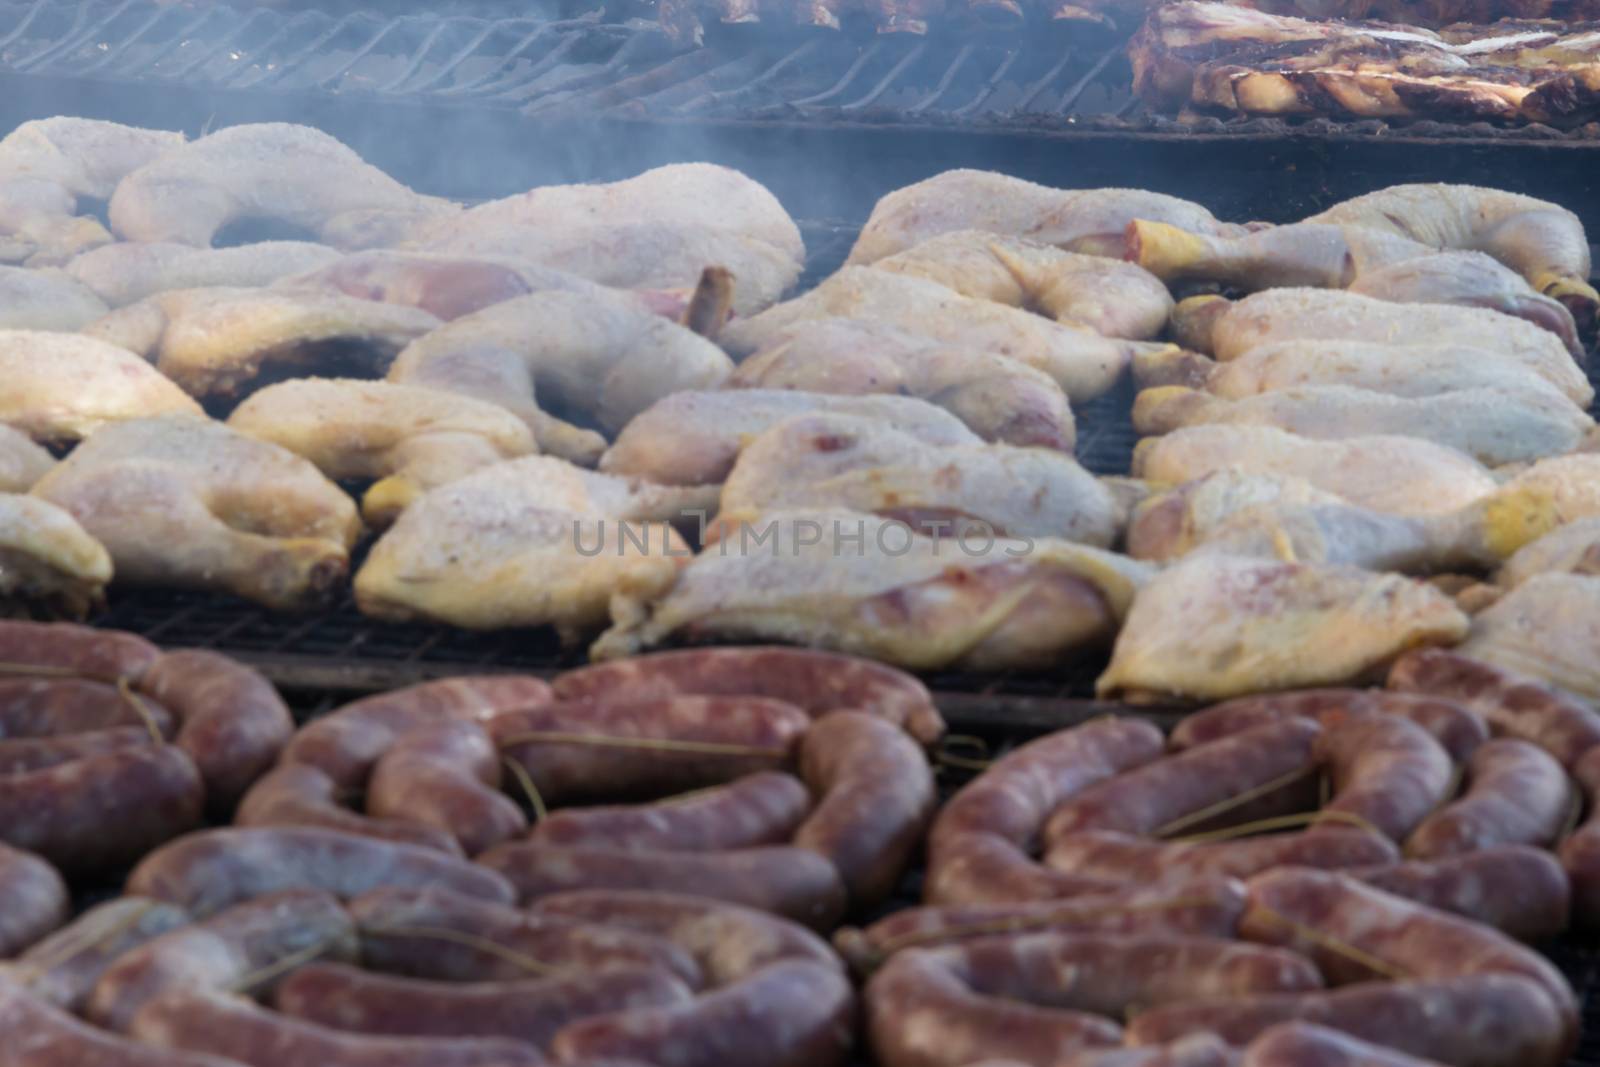 traditional meat grilled on the grill in the Argentine countryside